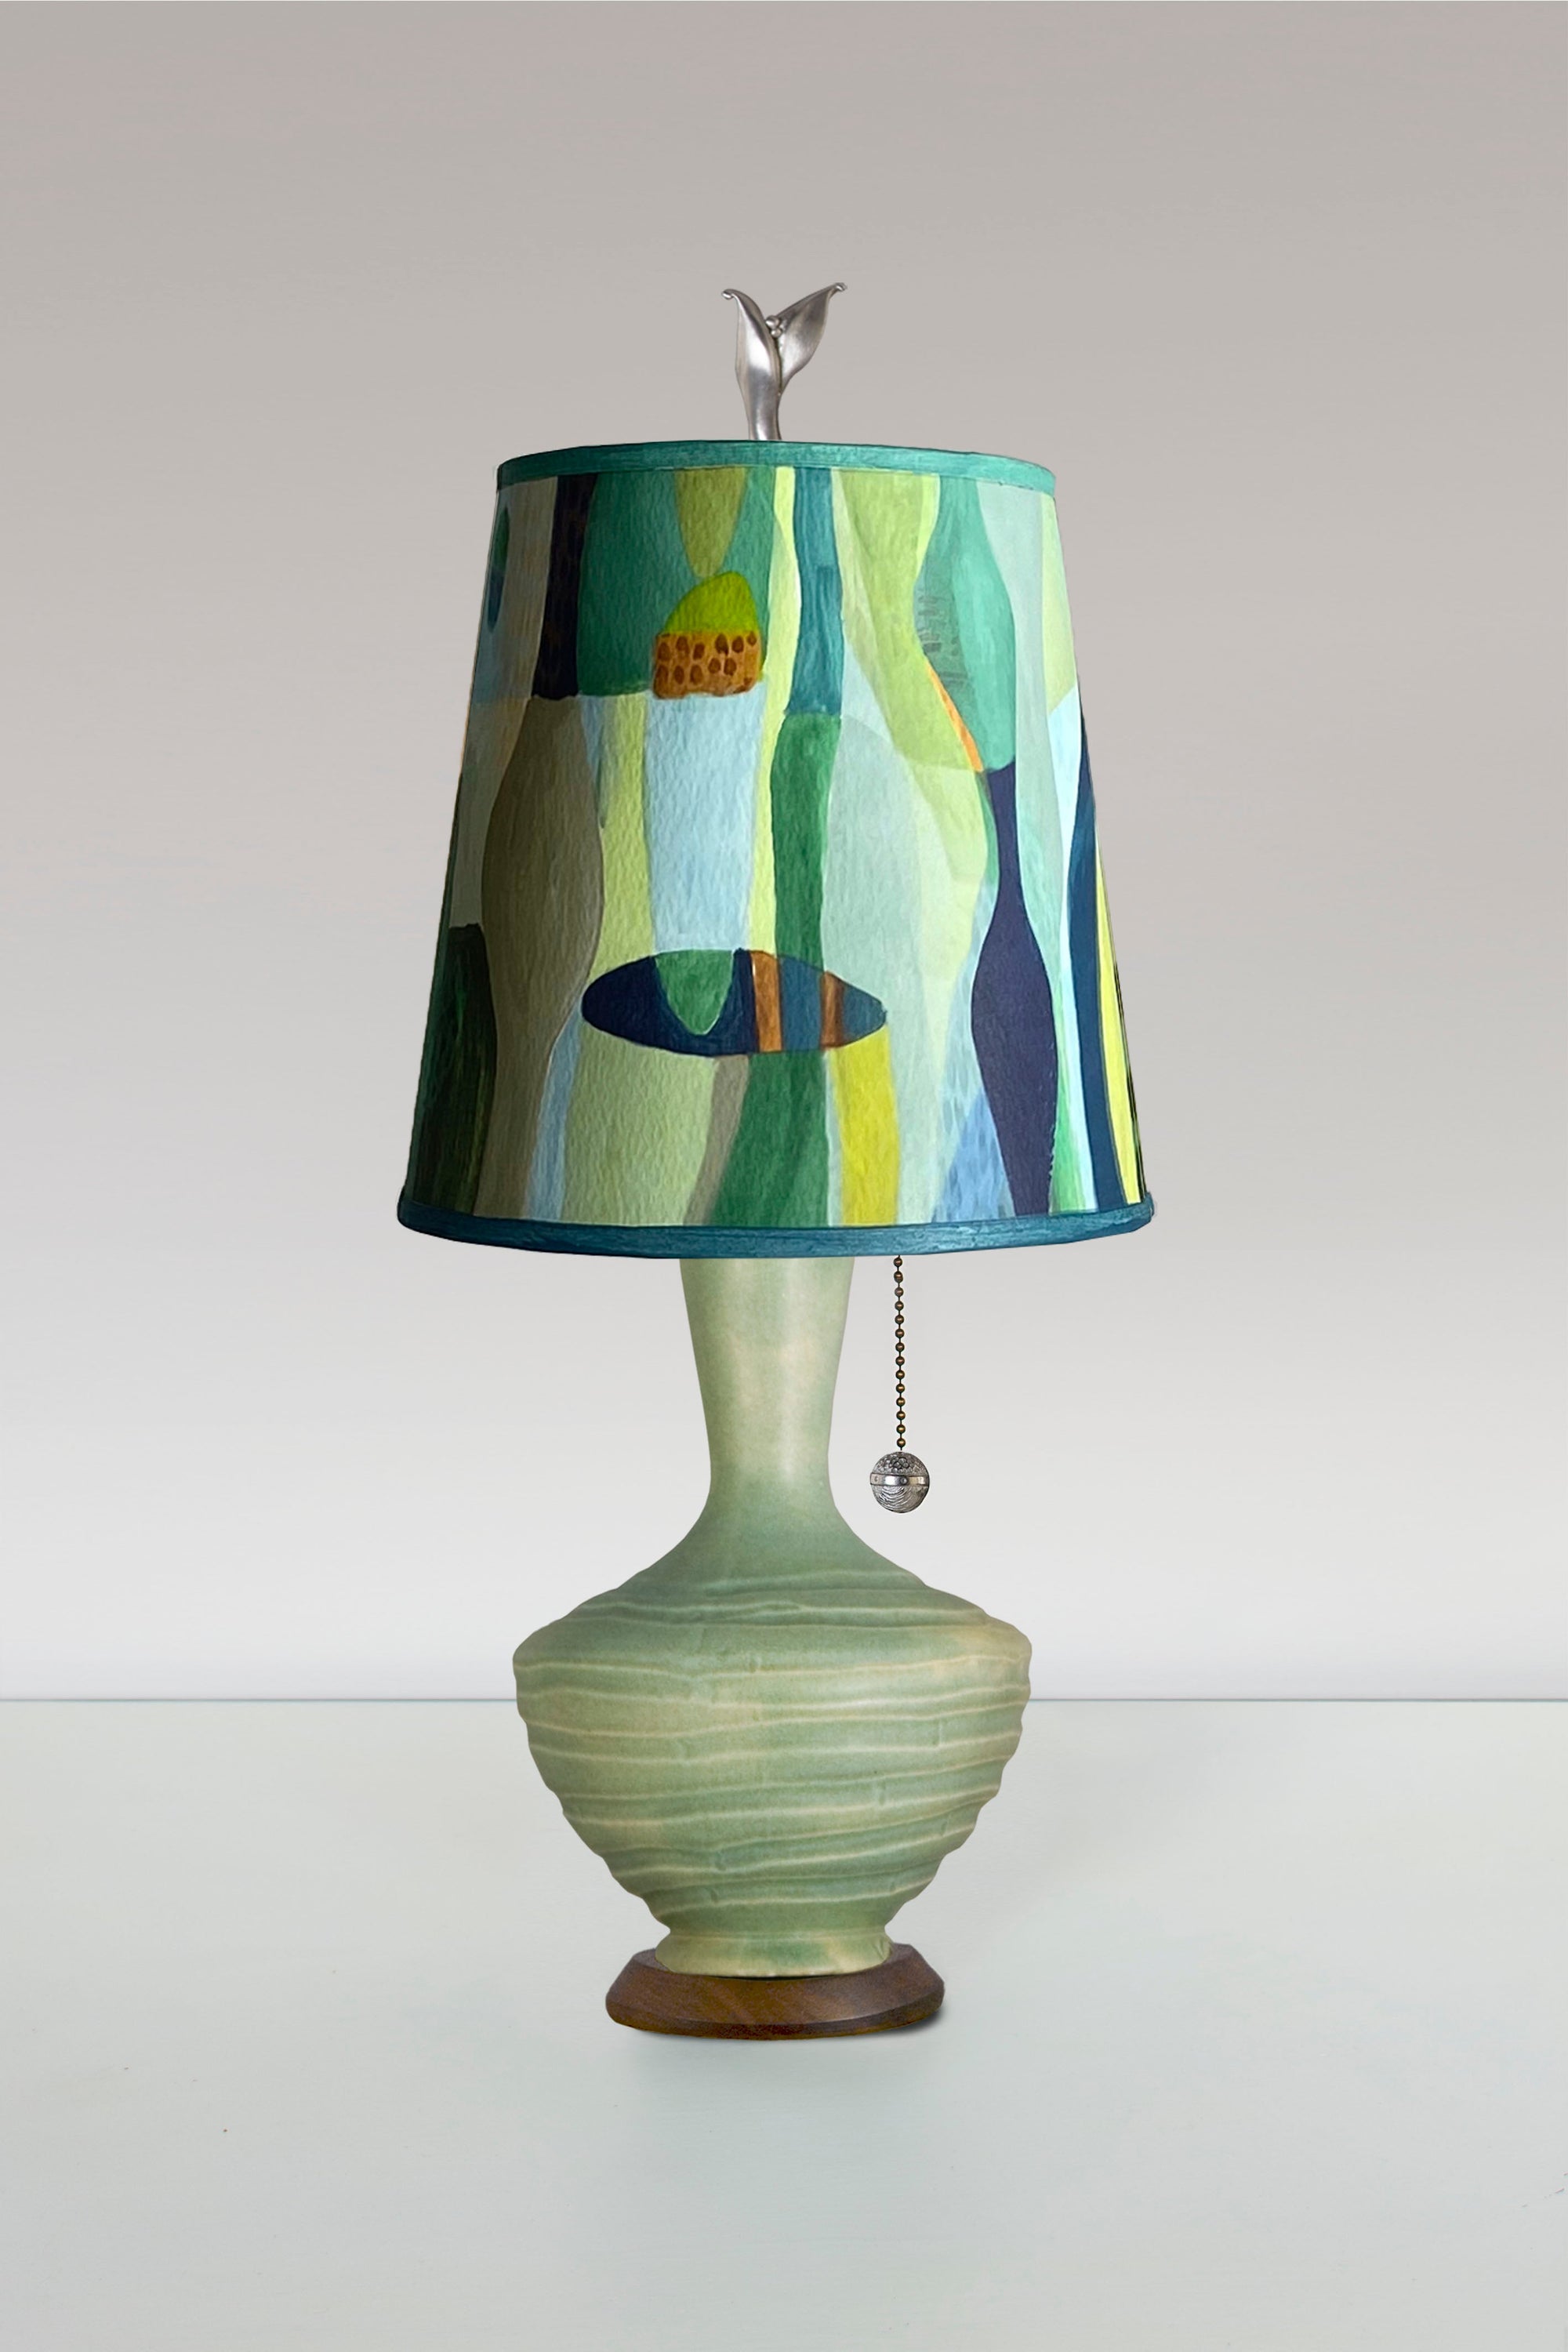 Janna Ugone & Co Table Lamp Ceramic Table Lamp in Old Copper with Small Drum Shade in Riviera in Citrus